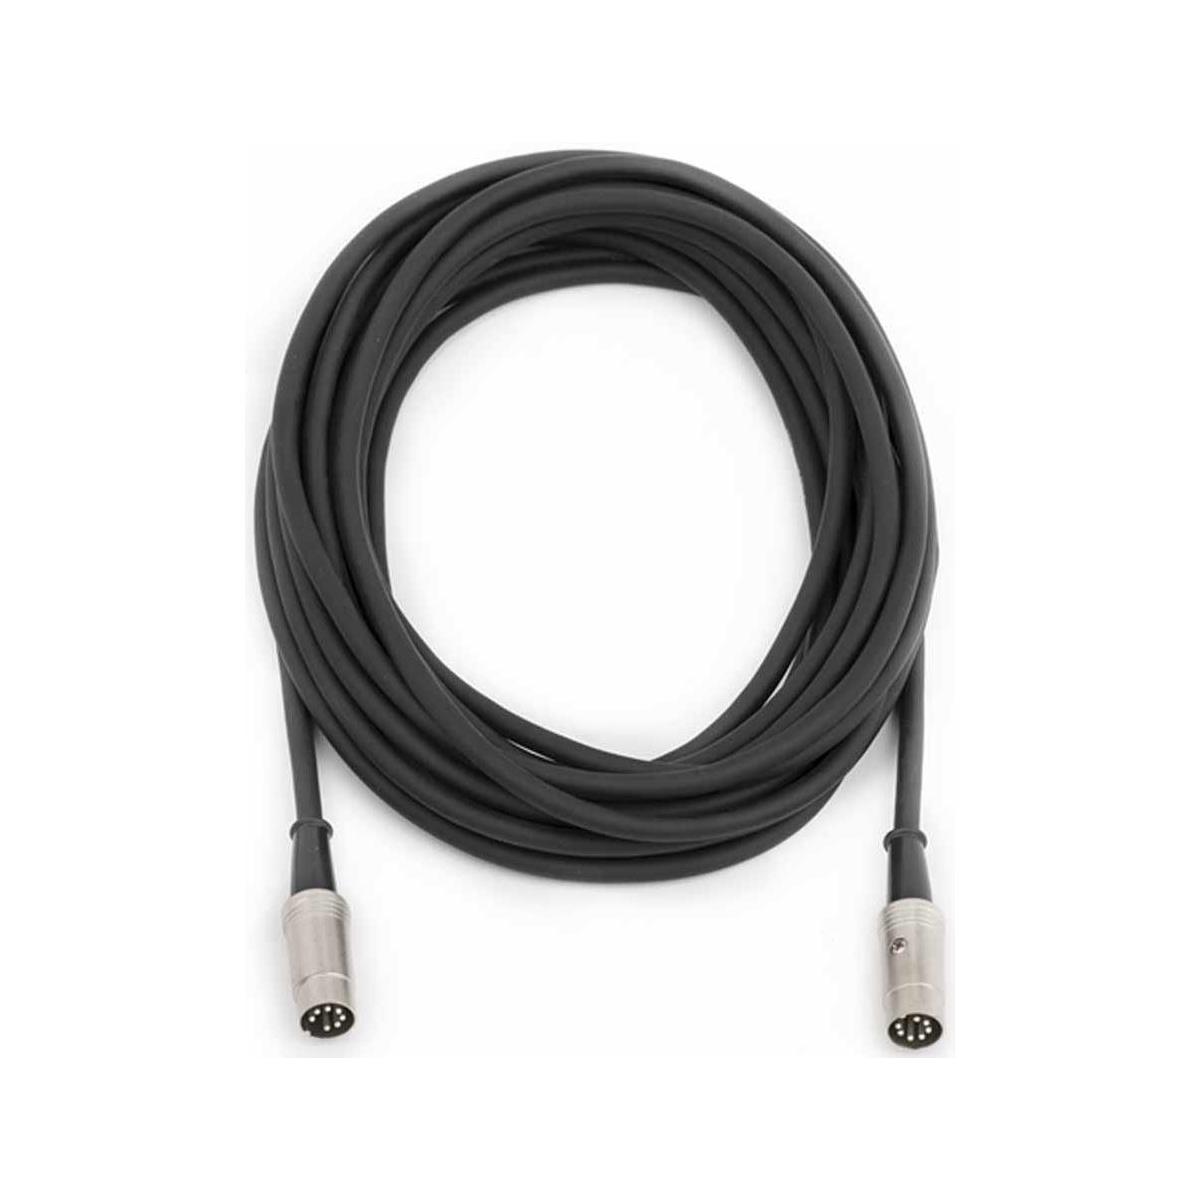 Image of Fender 25' 7-Pin DIN Footswitch Cable for Amplifiers